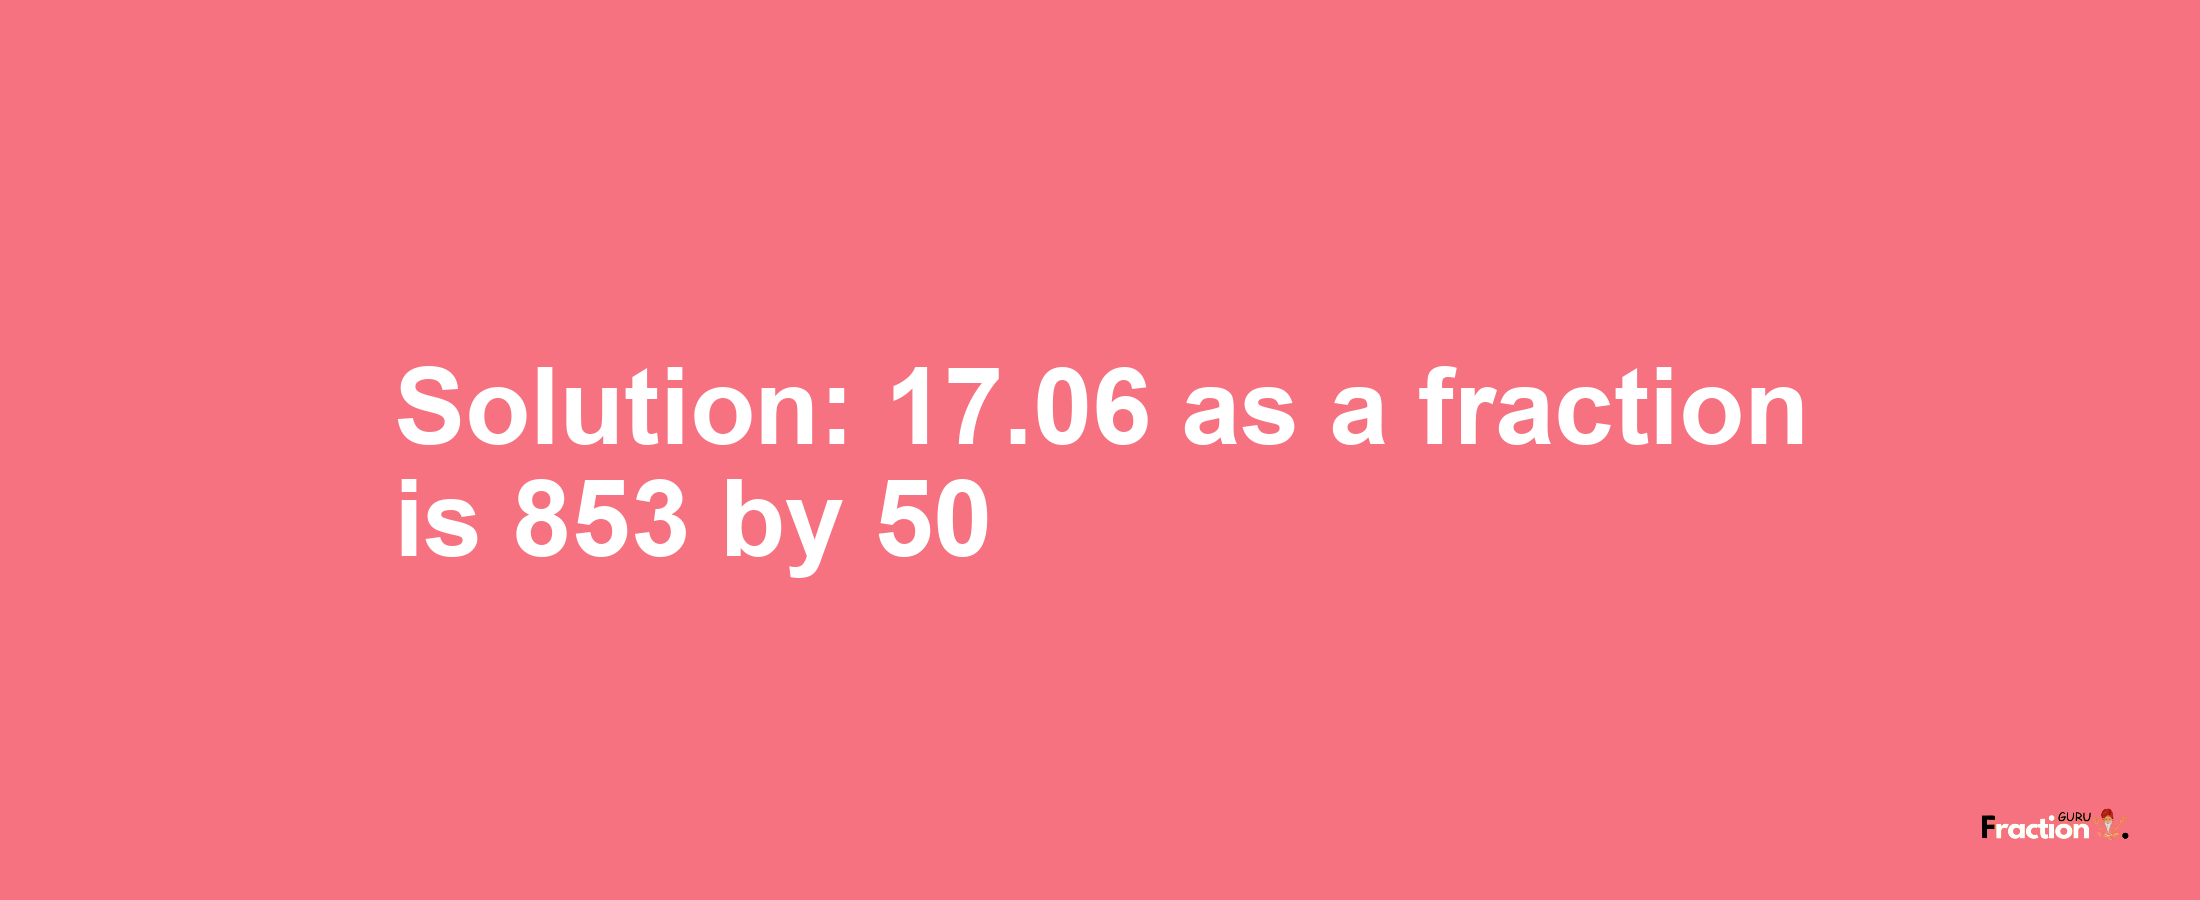 Solution:17.06 as a fraction is 853/50